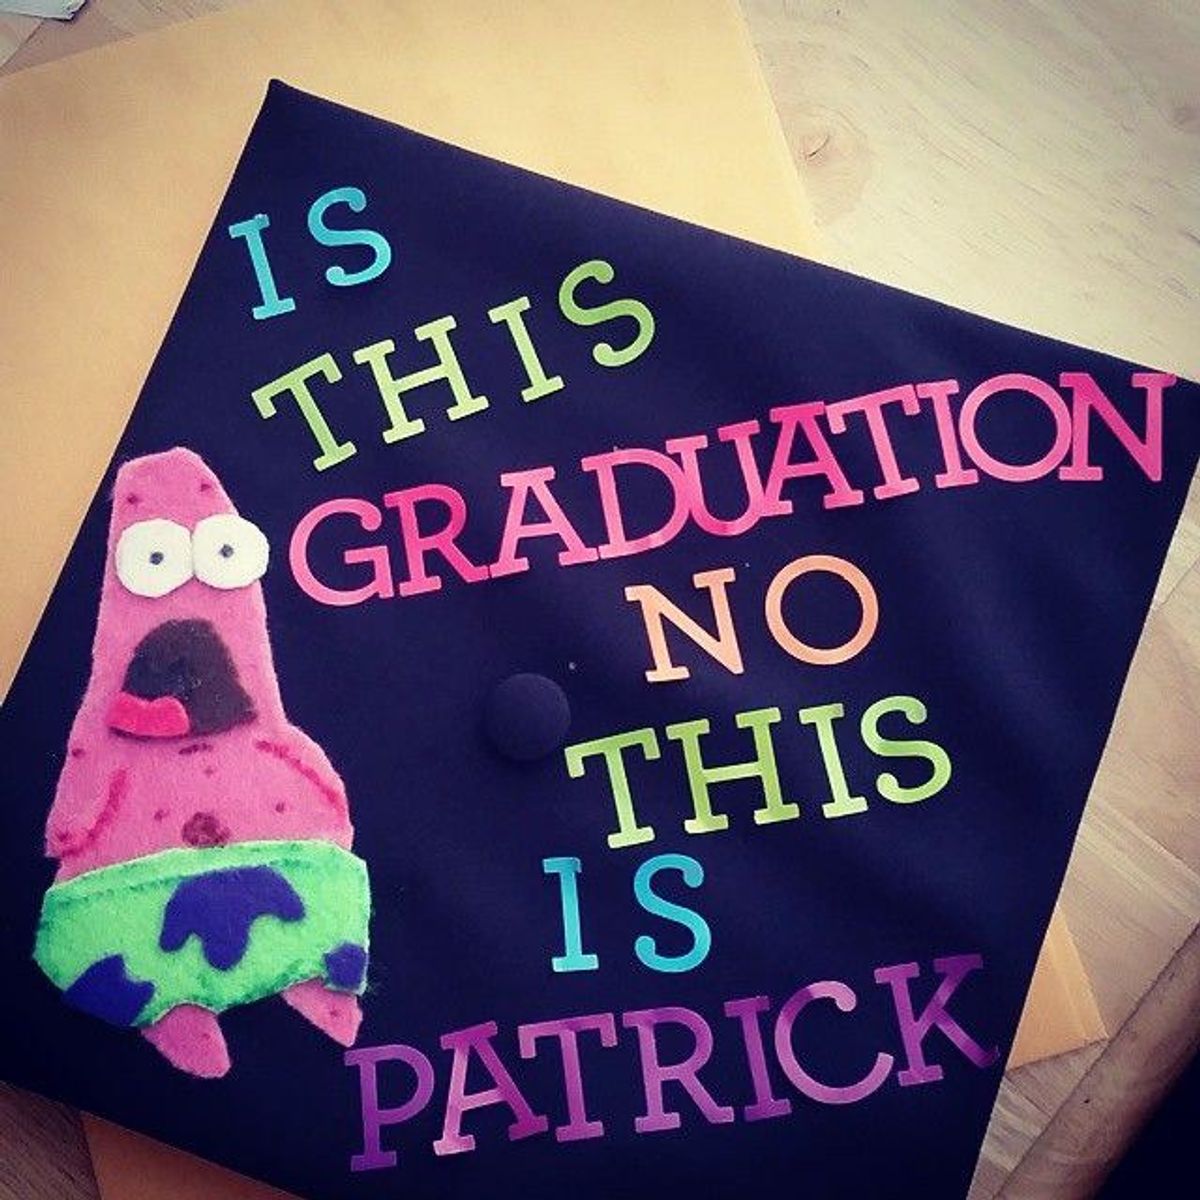 Why I Have a Back-and-Forth Relationship with Graduating